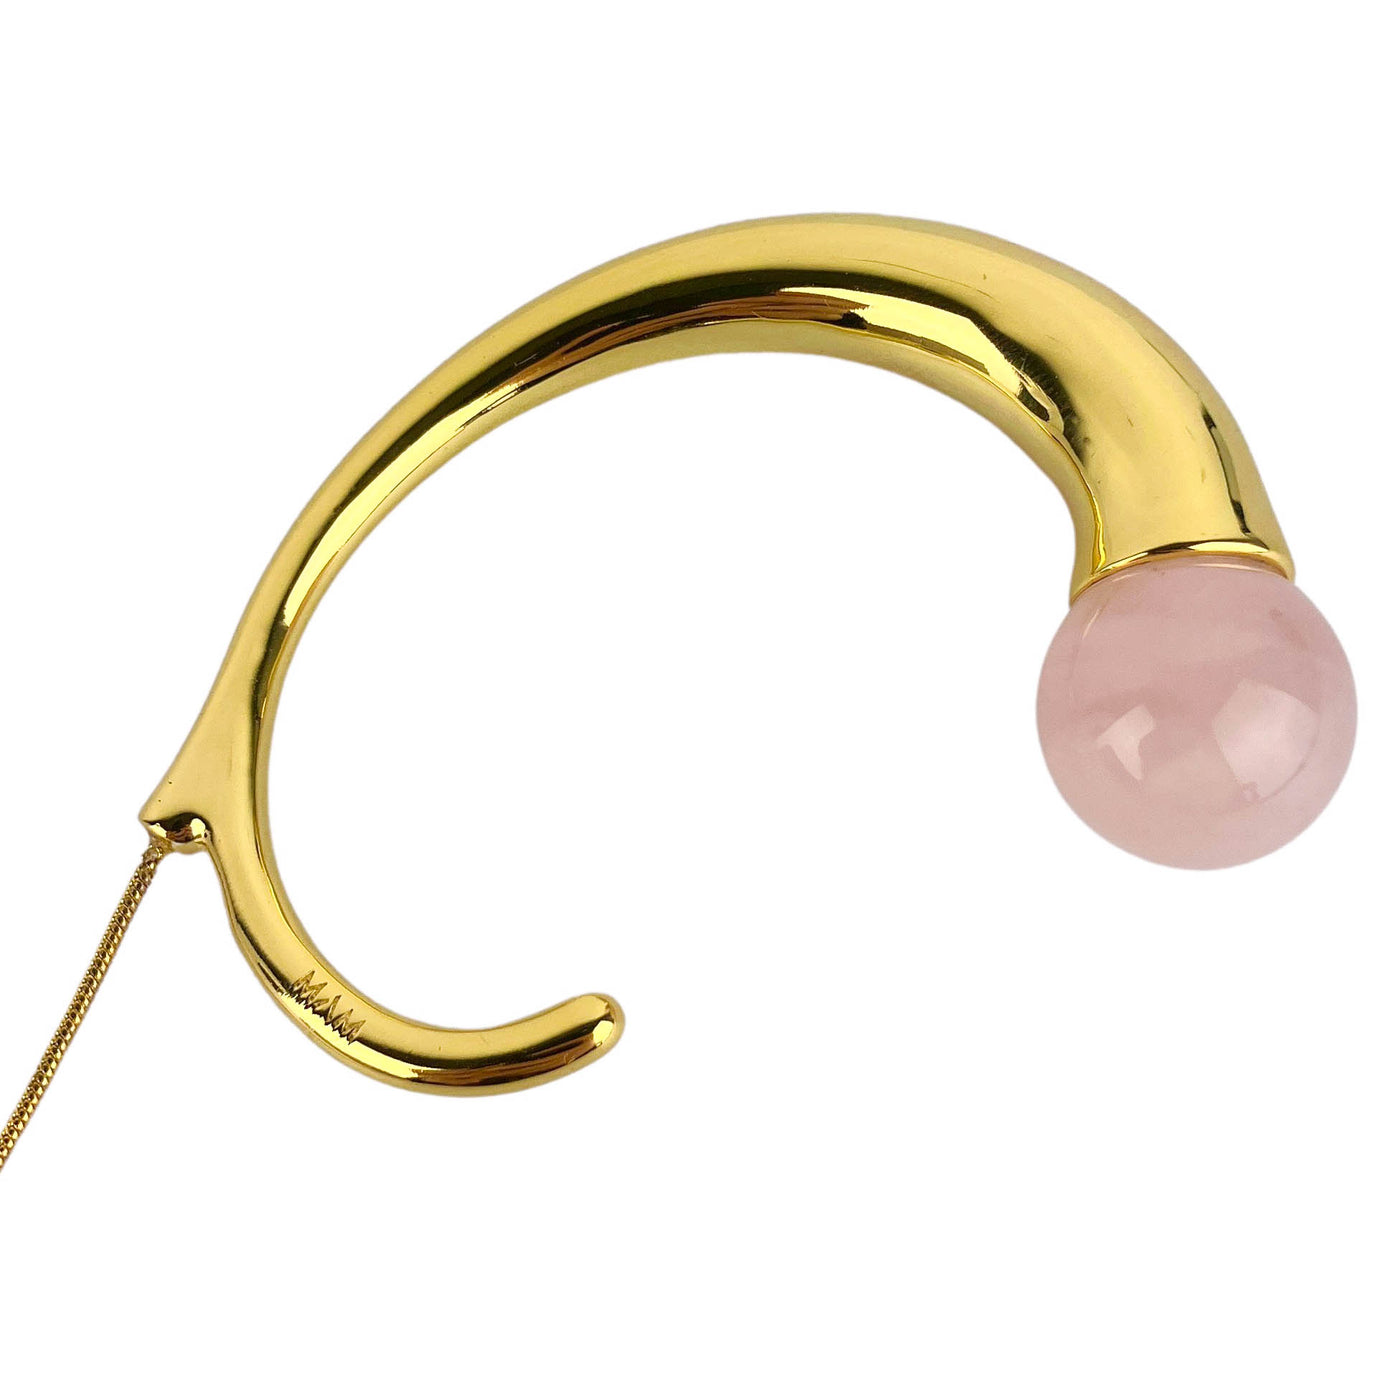 Exclusive Designer Blowup Ear Cuff in Gold - Discounts on Exclusive Designer at UAL